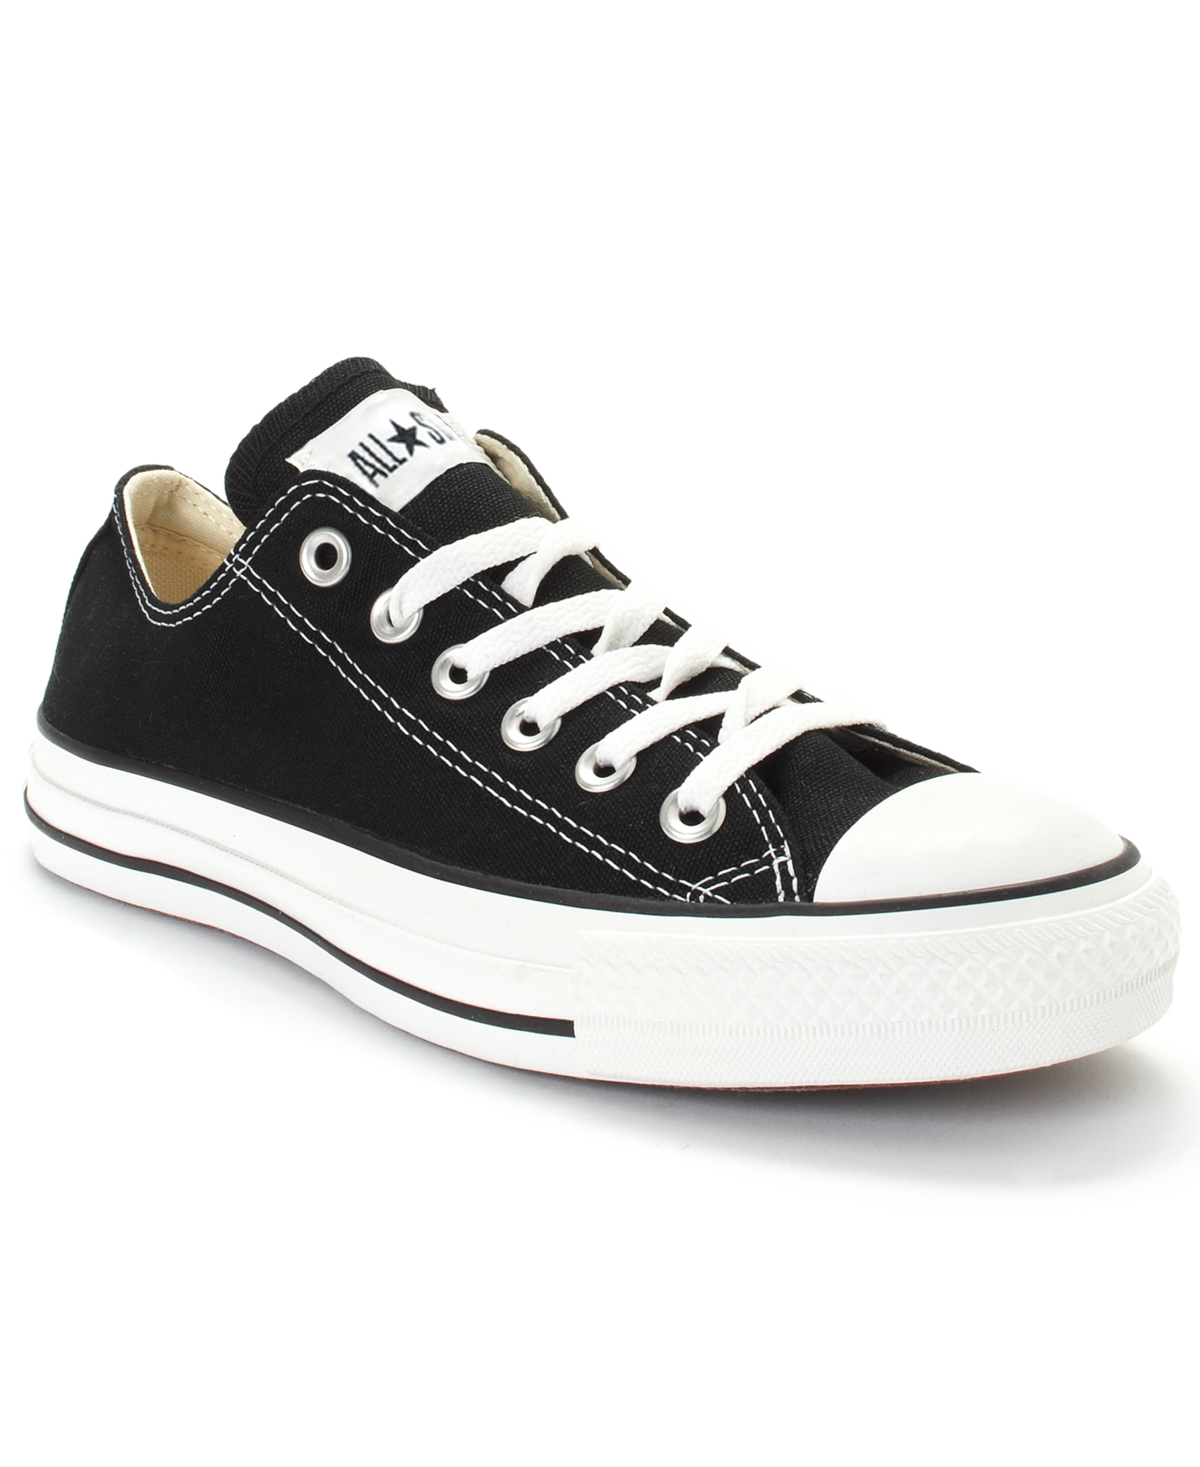 UPC 022866822763 product image for Converse Women's Chuck Taylor All Star Ox Casual Sneakers from Finish Line | upcitemdb.com